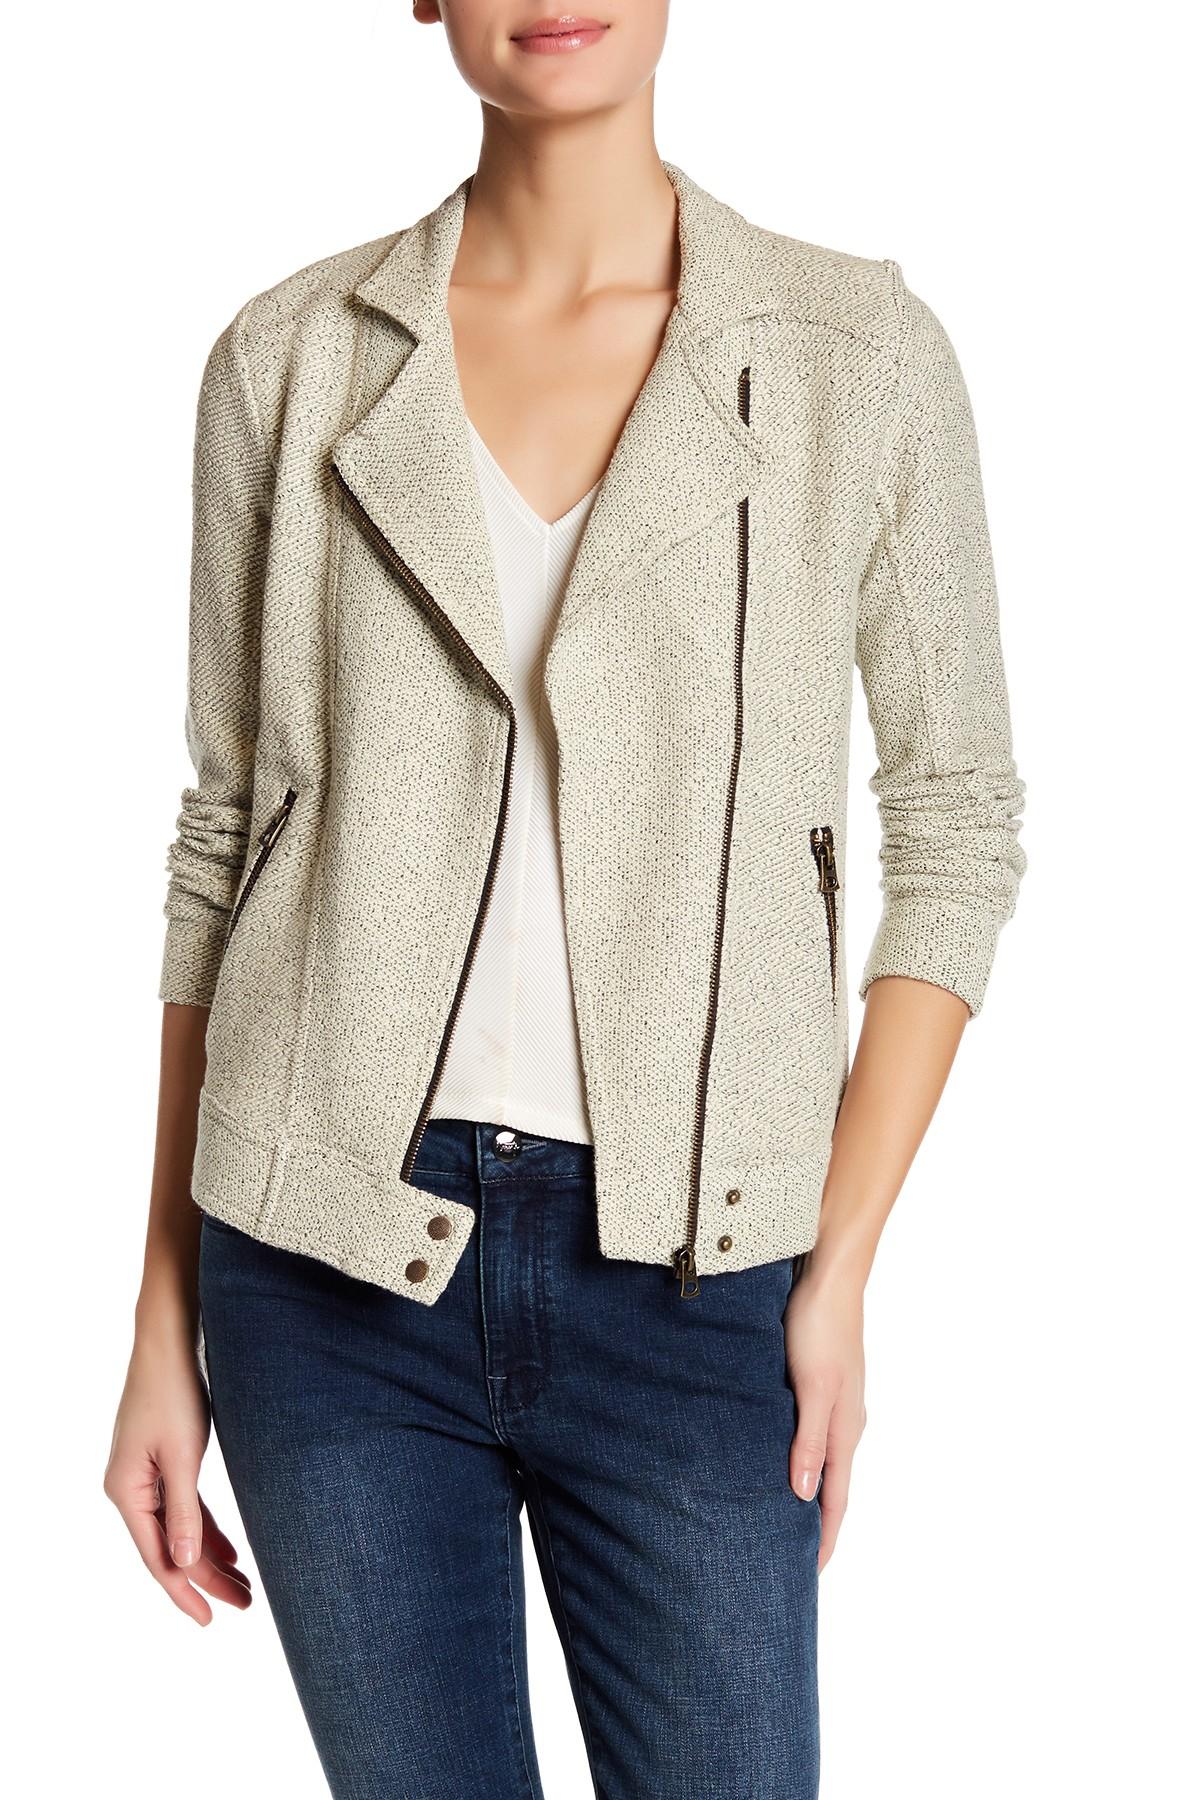 Lyst Lucky Brand Knit Moto Jacket in Natural